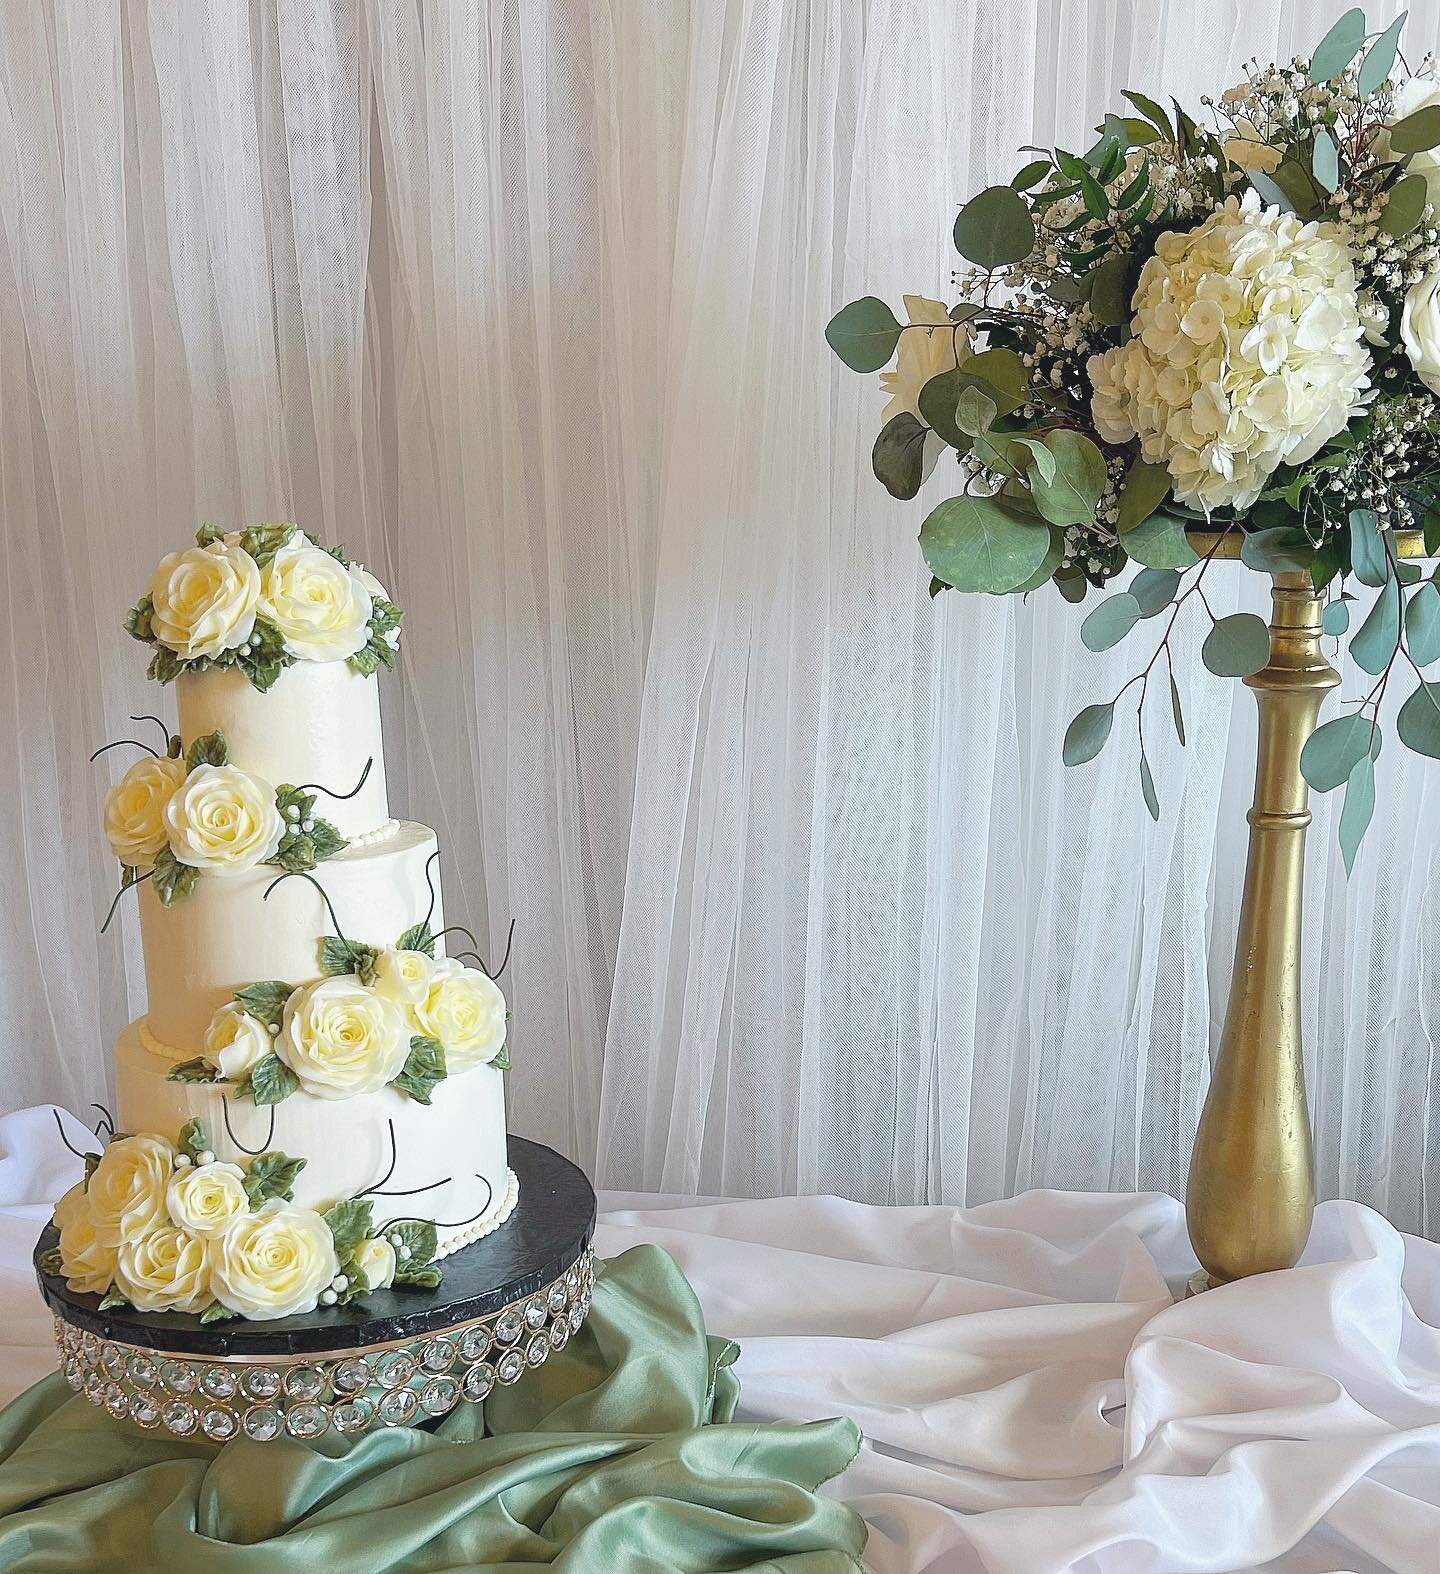 🤍 CAKE 🤍 
Chinitas Venue and our amazing Pastry Chef make your special day SWEET! 
🤍🤍Ask about our All-Inclusive Wedding Package! 🤍🤍
#weddingcake #wedding #hendersonnevada #hendersonwedding #2023wedding #vegaswedding #loveweddings #chinitastapa